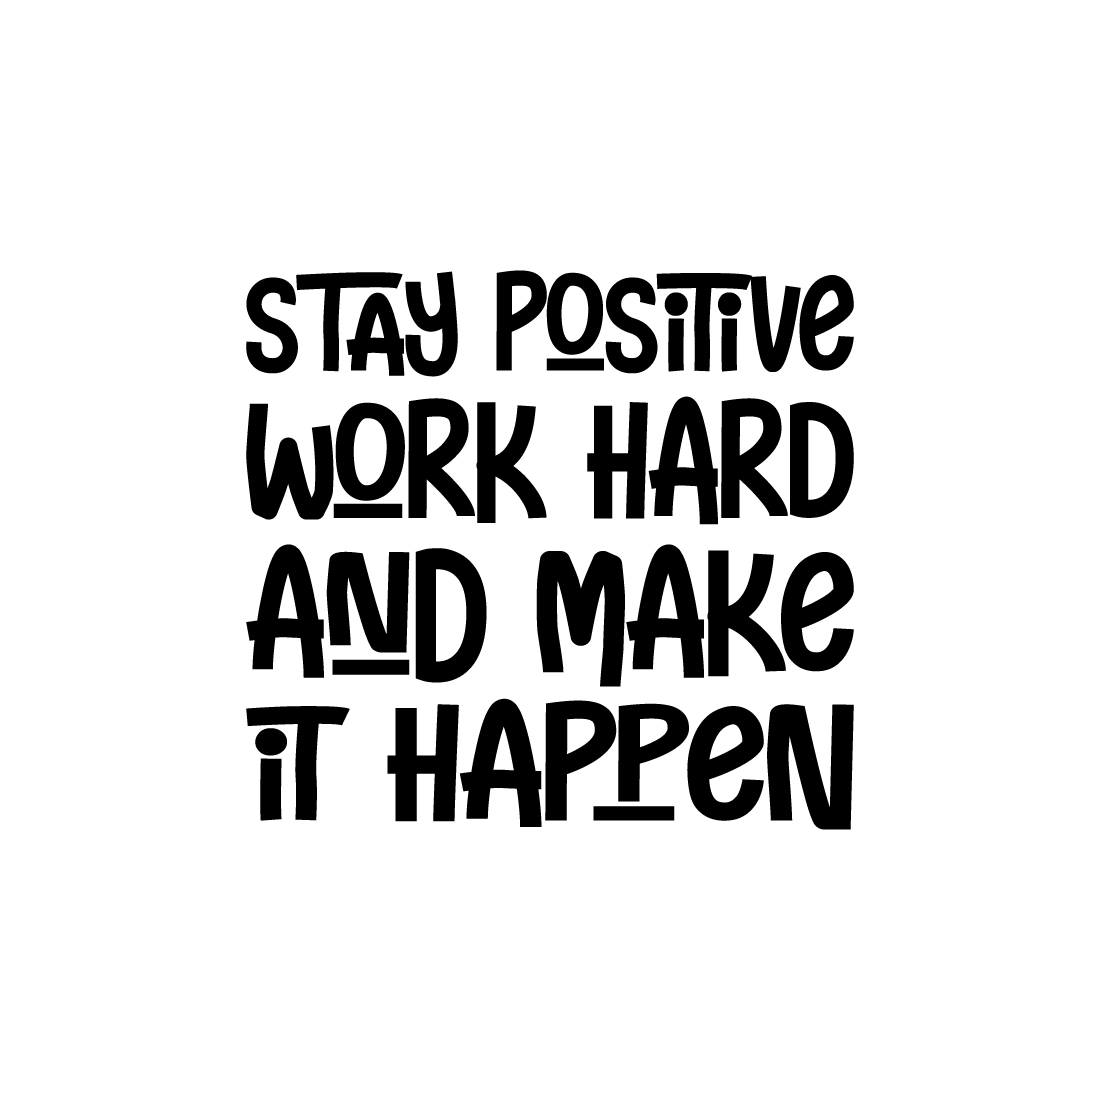 Free Stay positive, work hard, and make it happen motivational quotes hand drawn lettering SVG for posters, print, t-shirts, mugs, etc pinterest preview image.